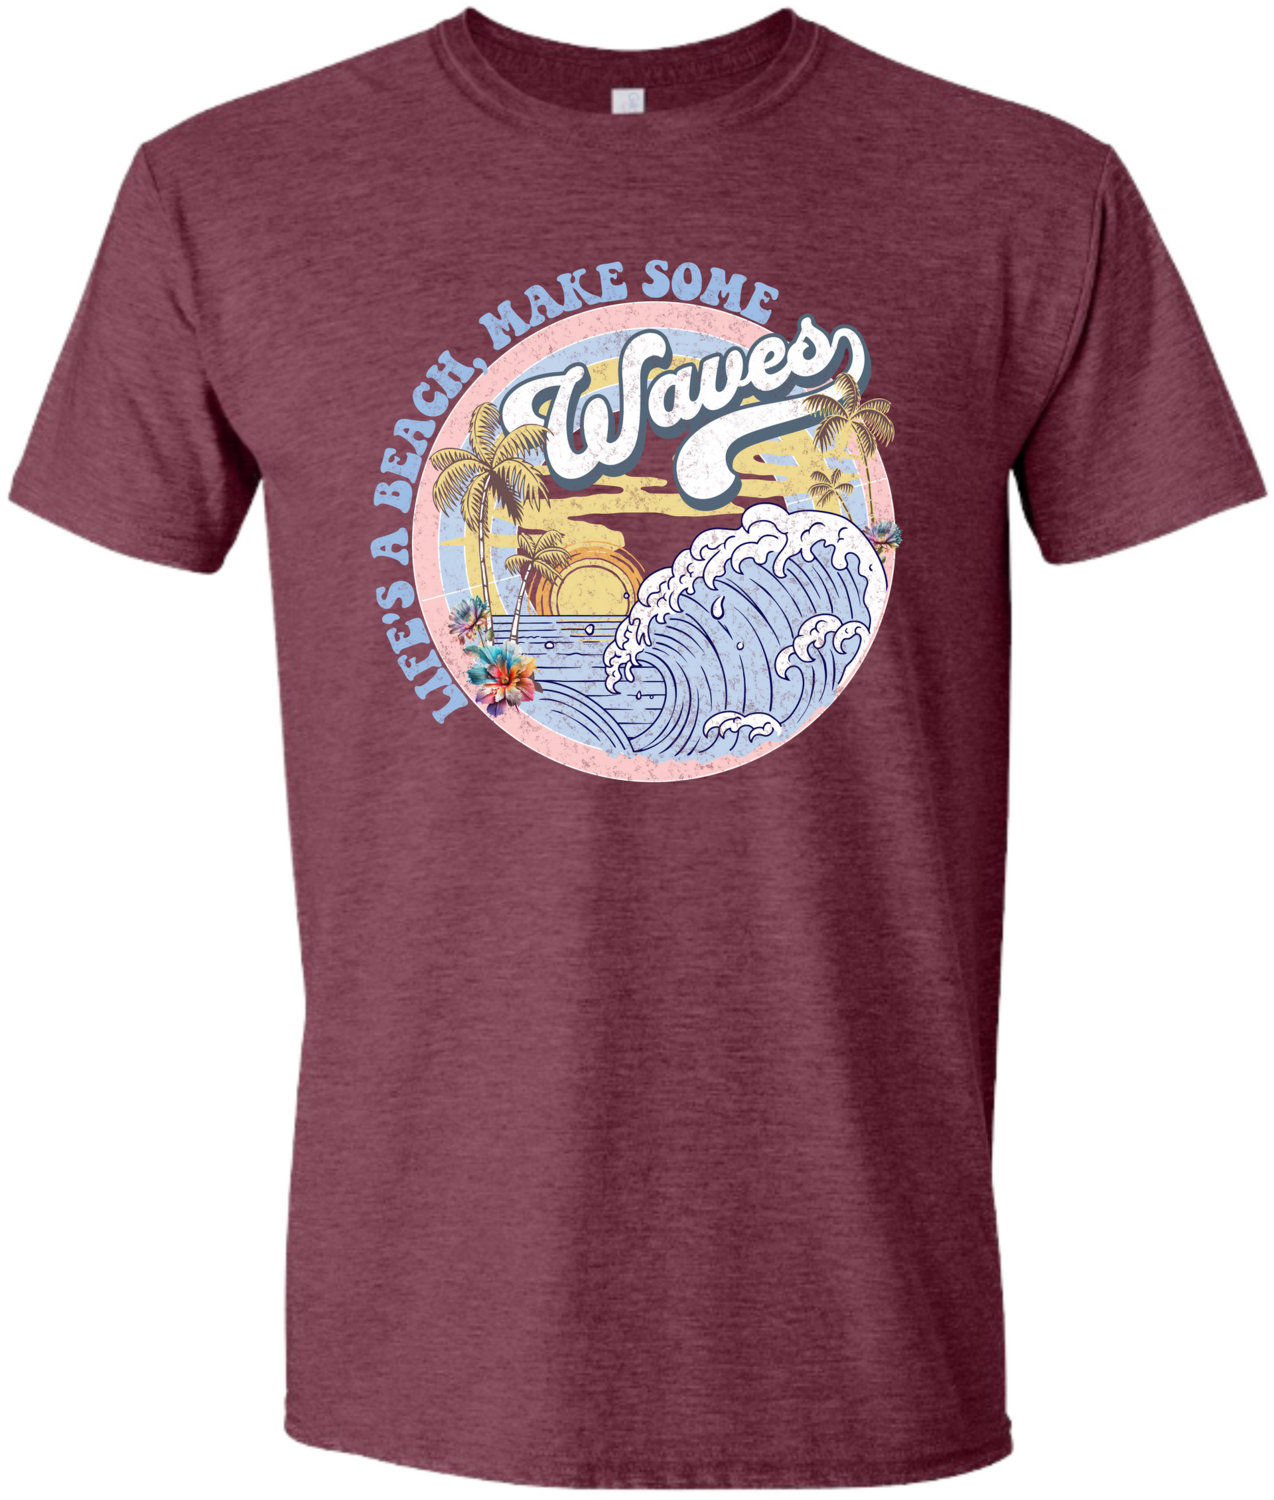 Lifes a beach make some WAVES Tee, Adult